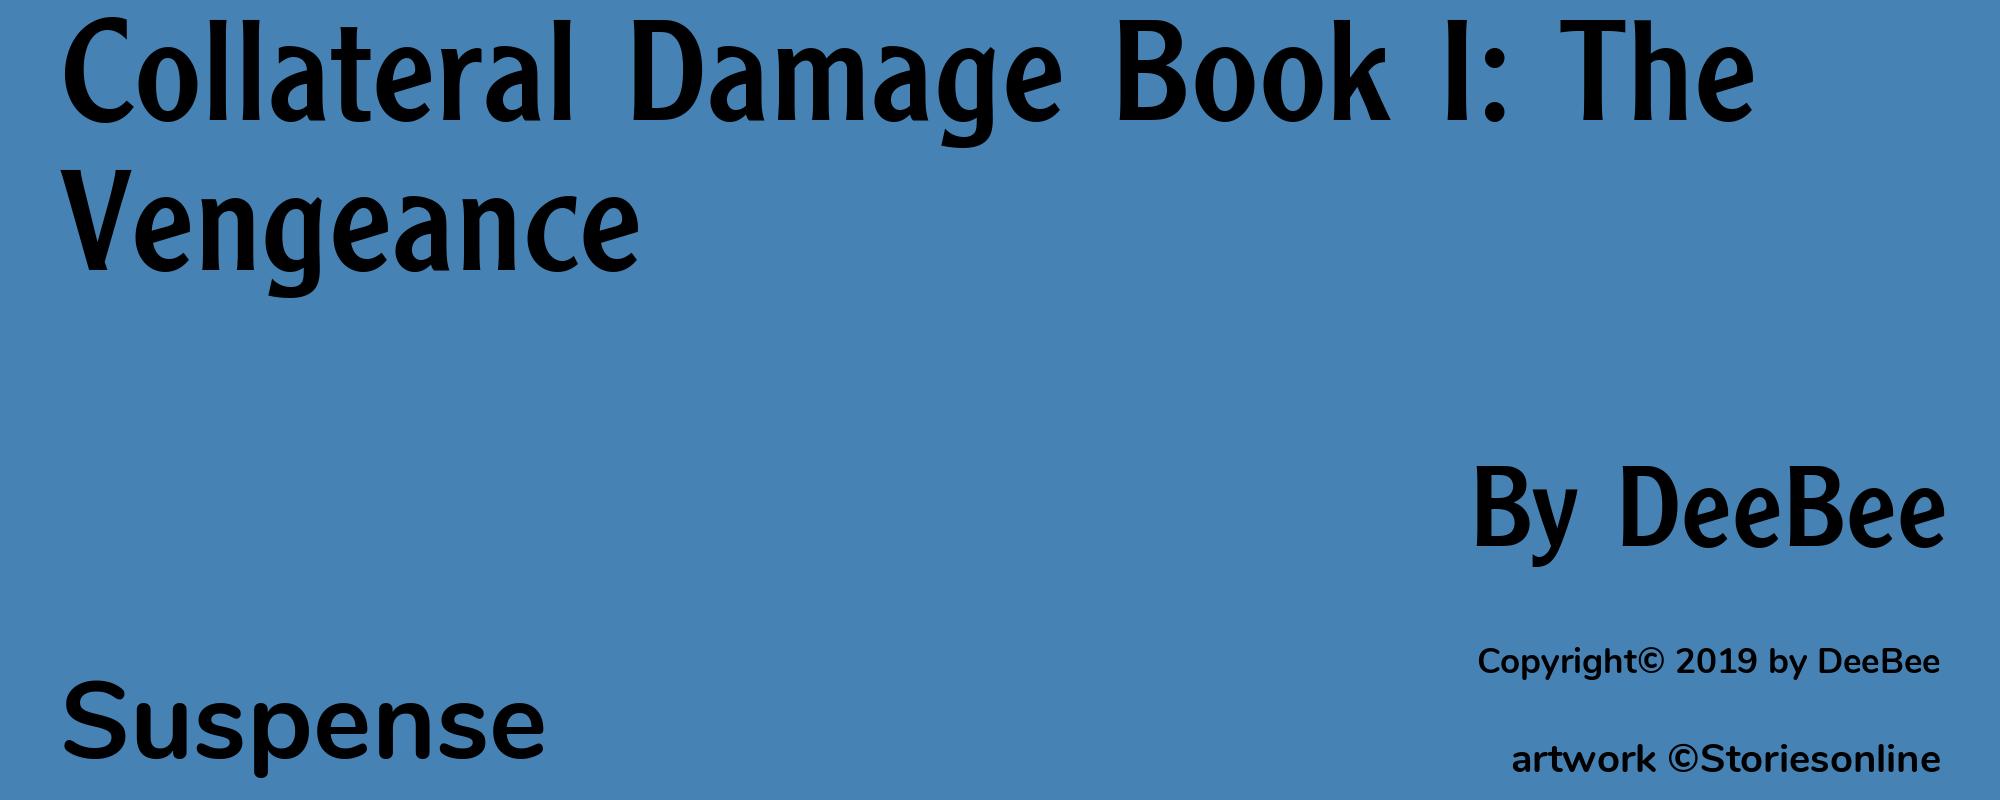 Collateral Damage Book I: The Vengeance - Cover